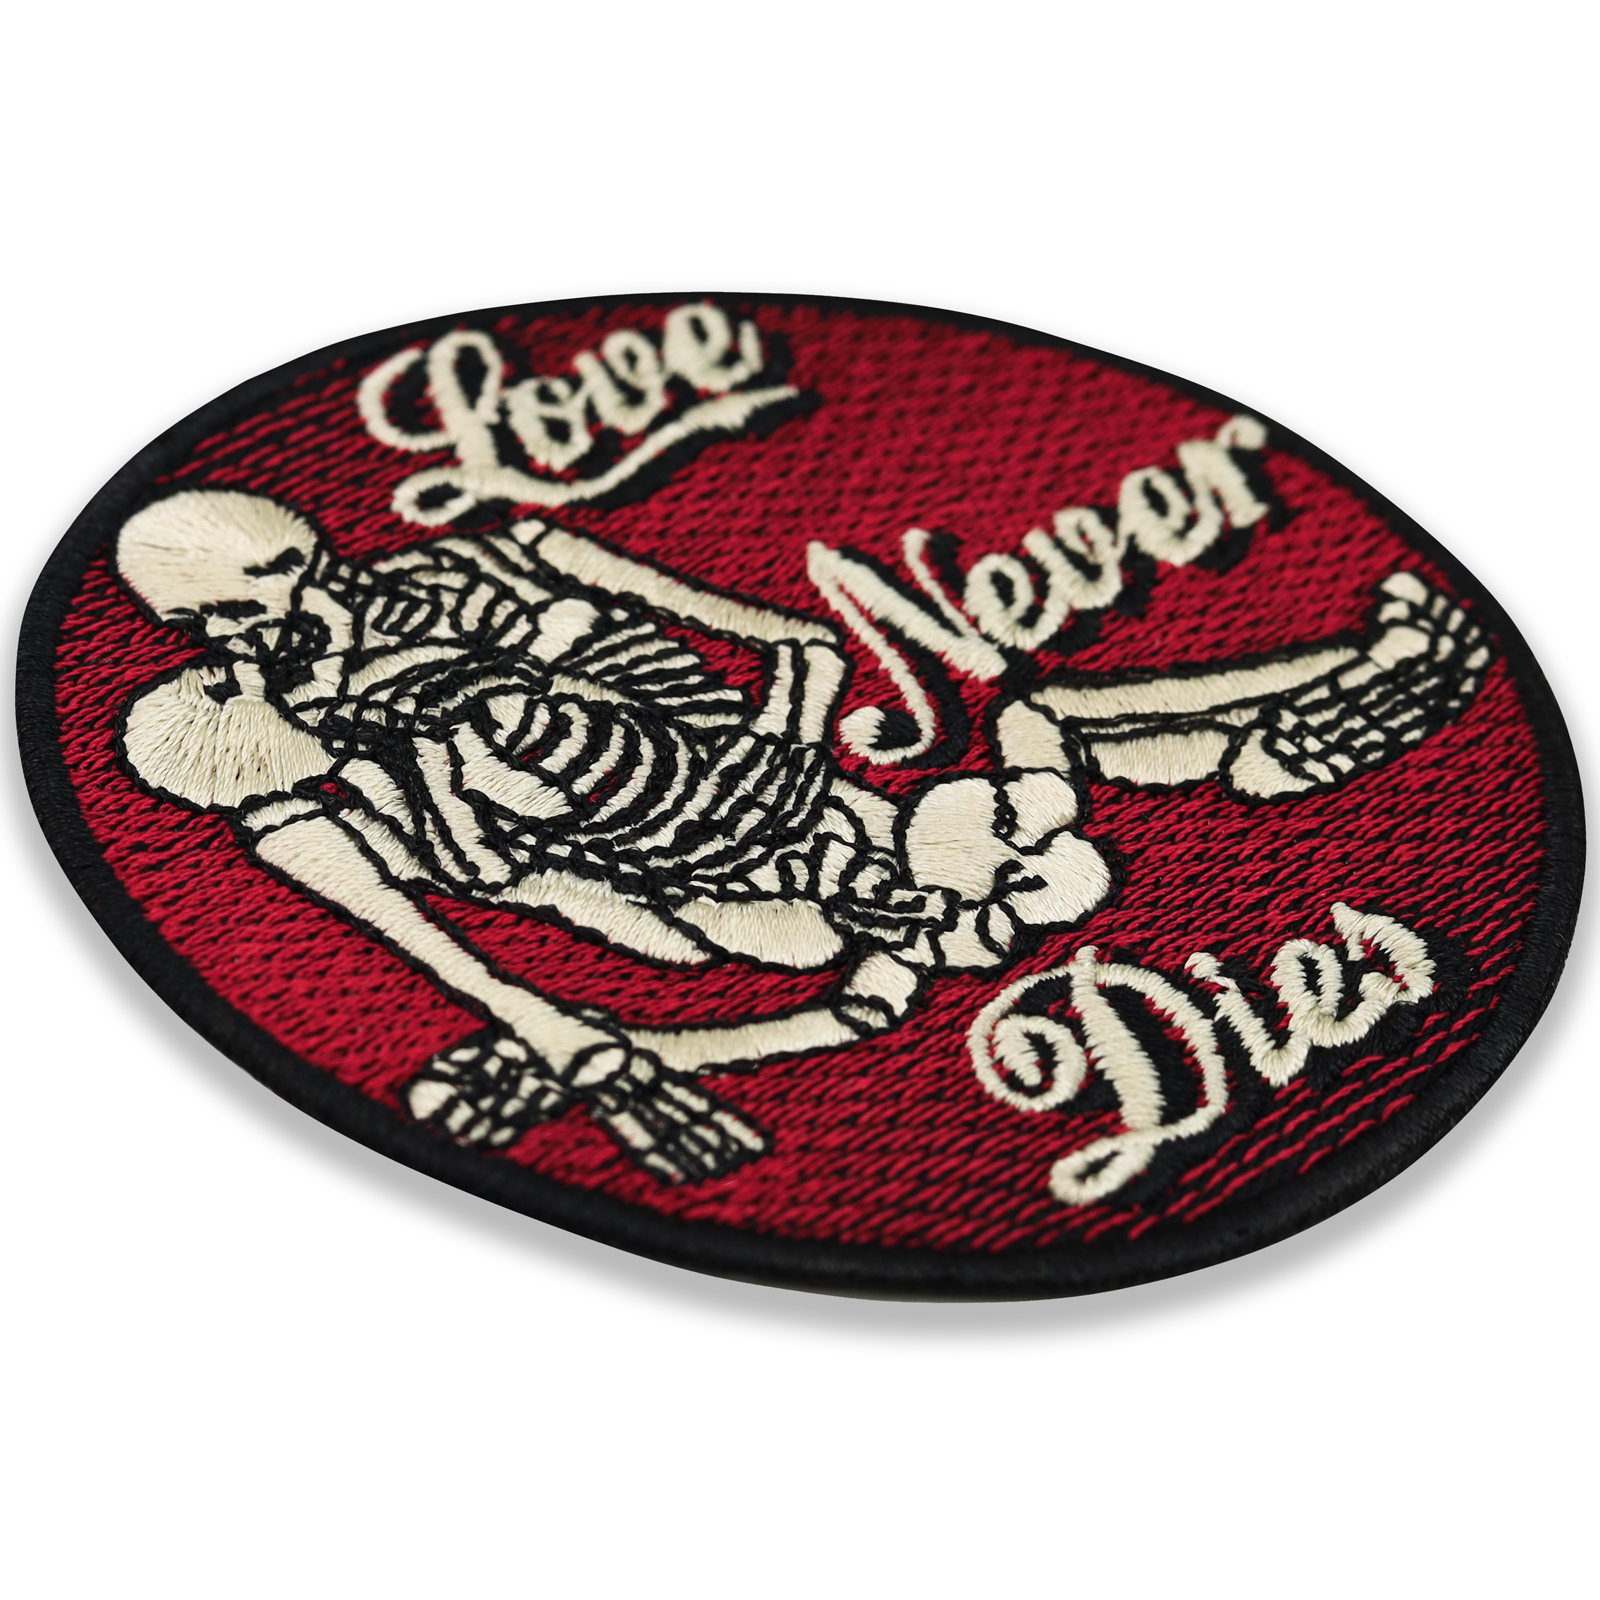 Love never dies - Patch